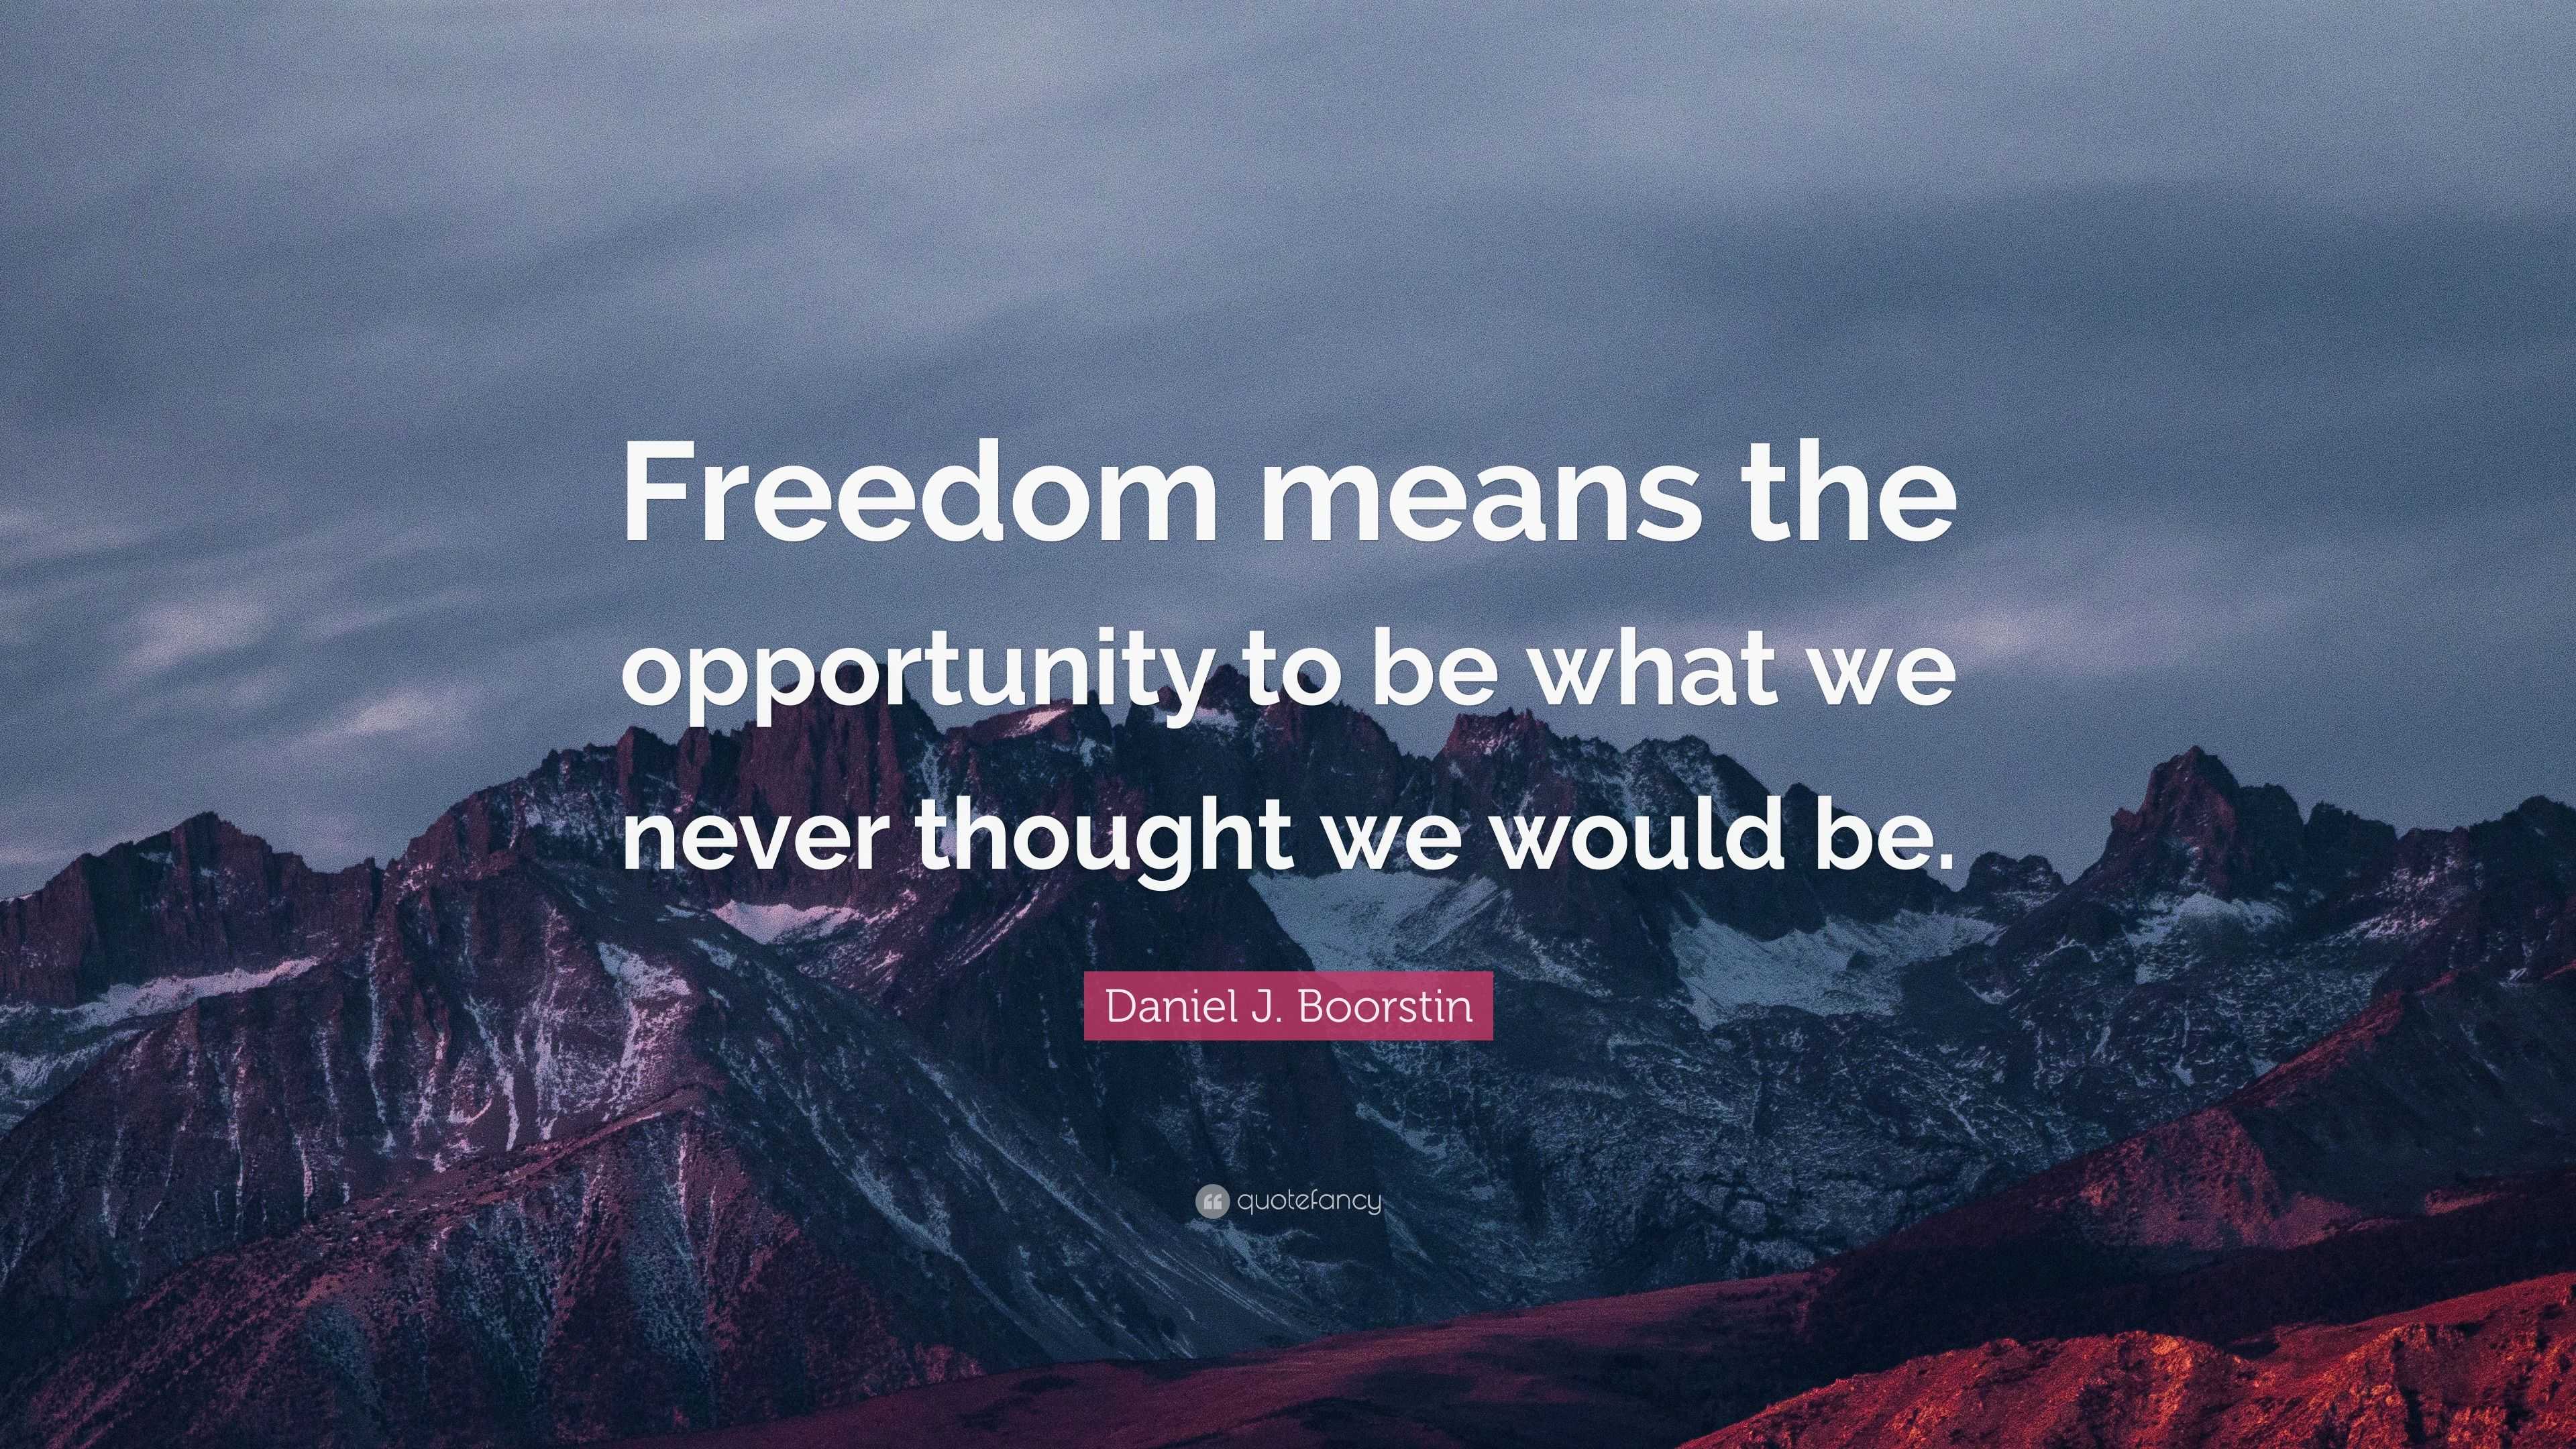 Daniel J. Boorstin Quote: “Freedom means the opportunity to be what we ...